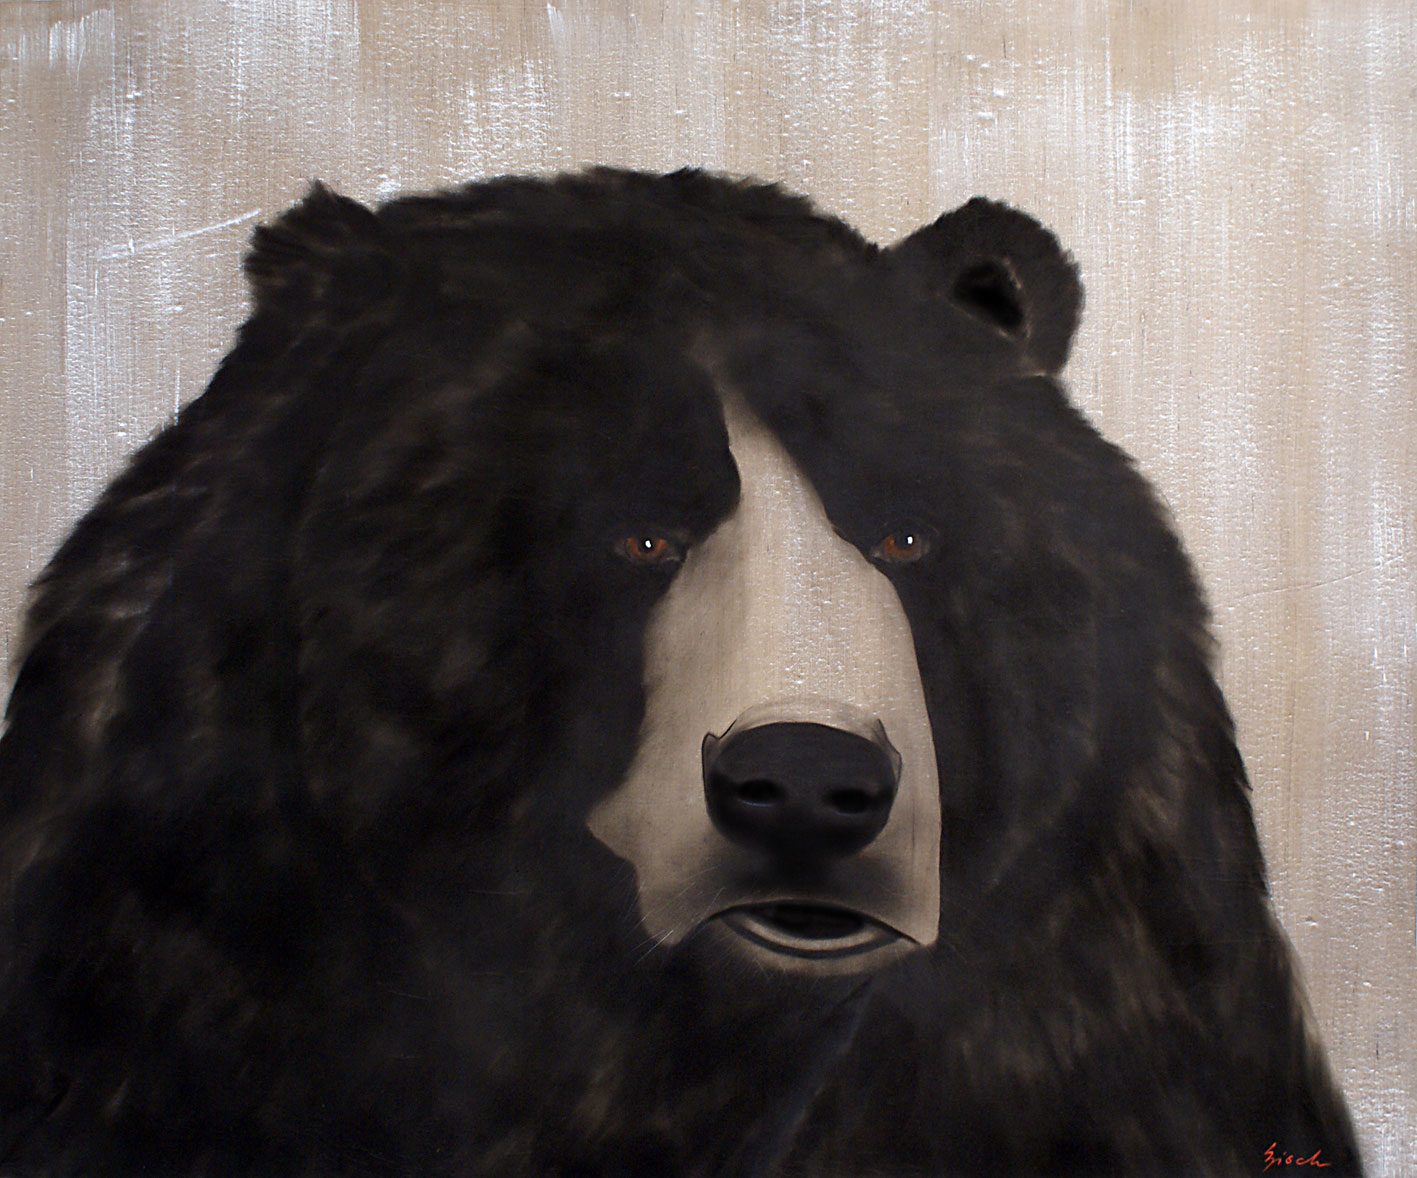 GRIZZLY-BEAR- grizzly-ours-brun-ours Thierry Bisch artiste peintre animaux tableau art  nature biodiversité conservation  